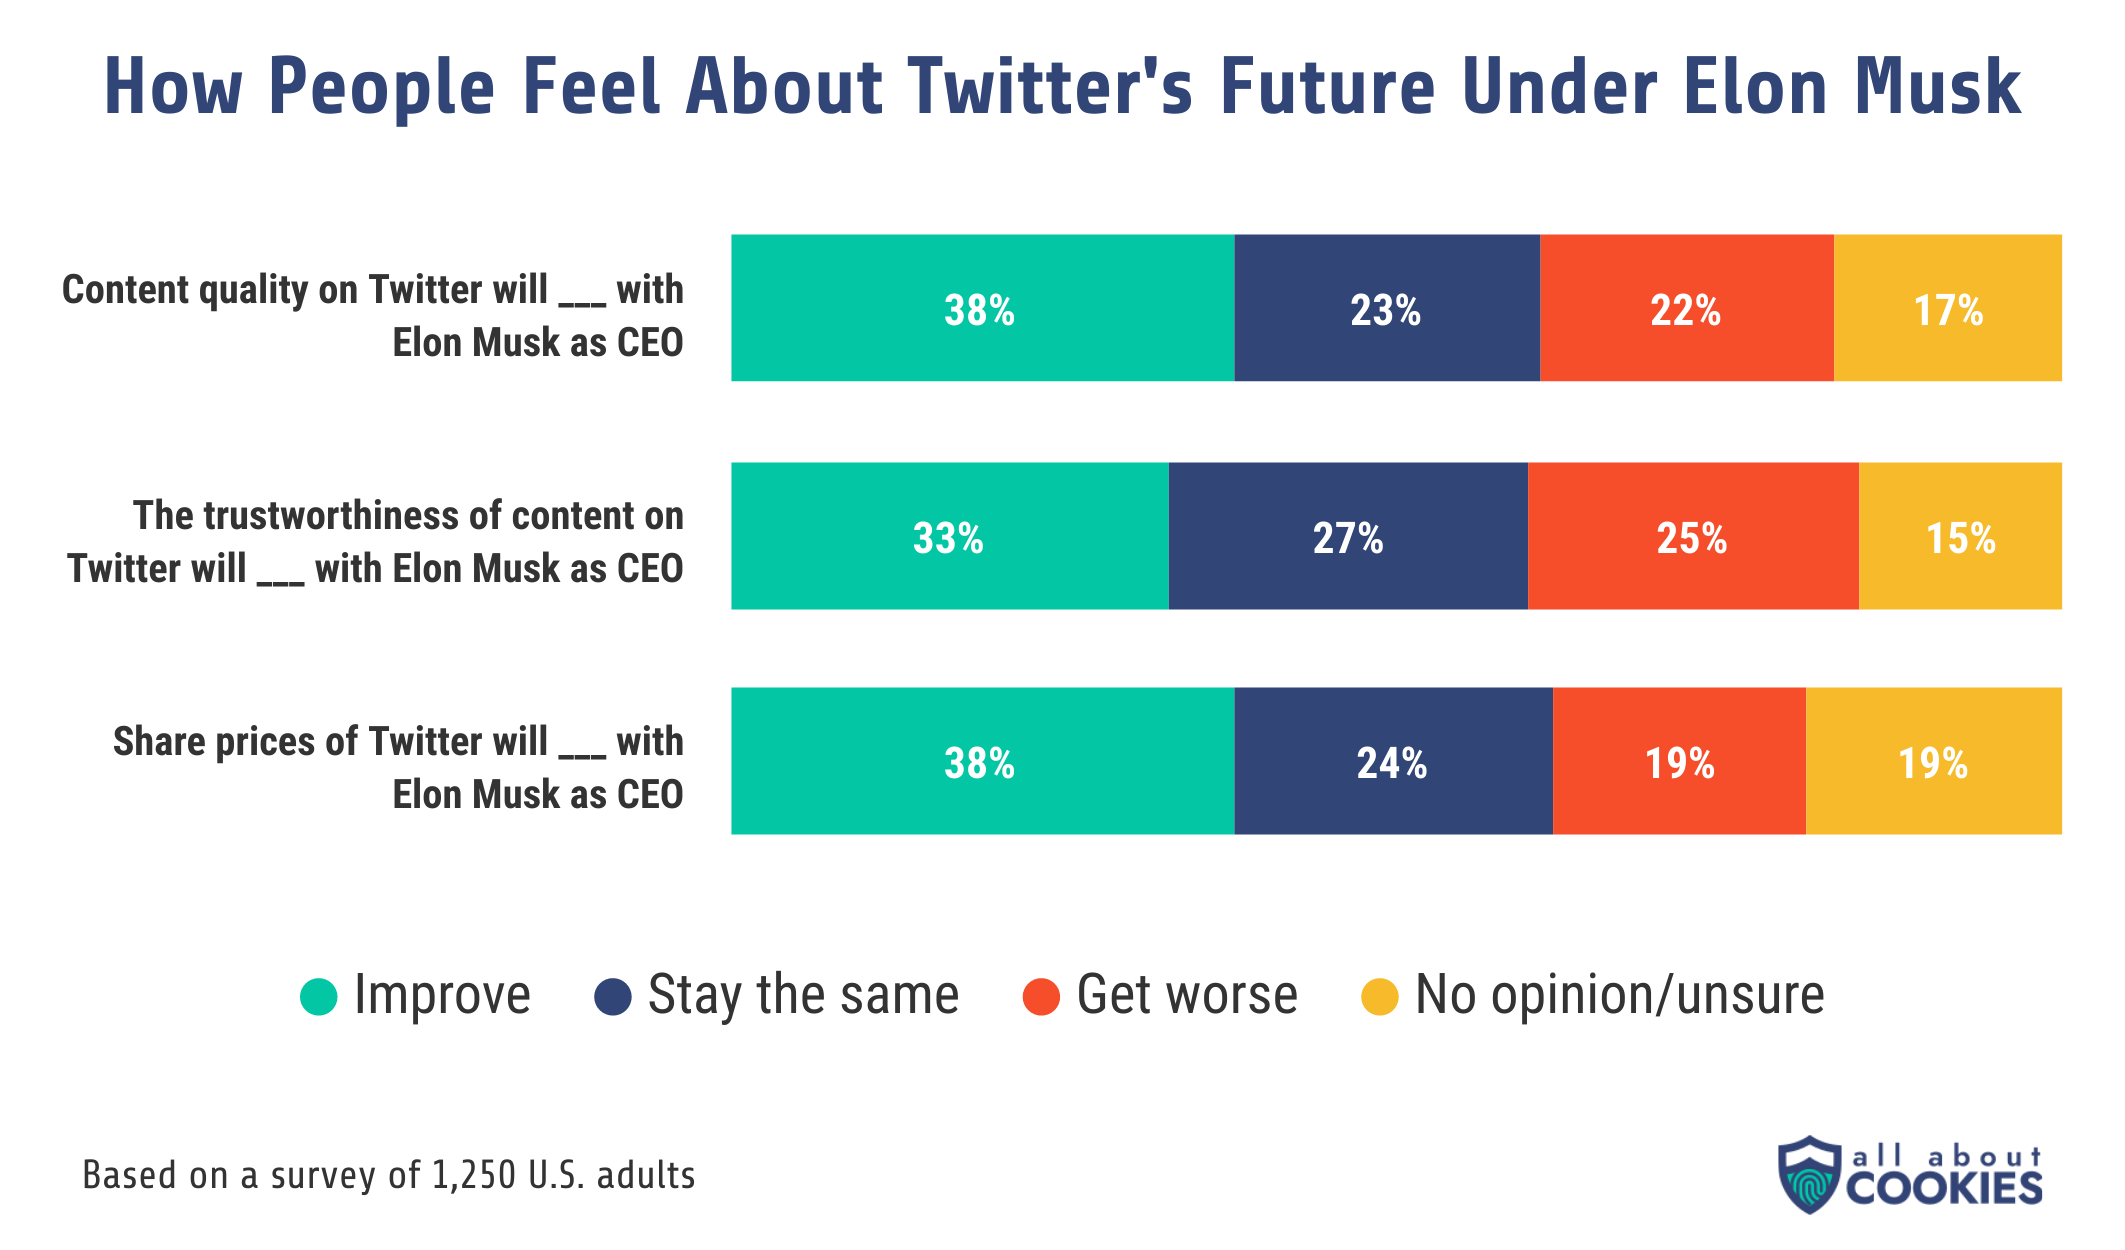 Most U.S. adults think the future of Twitter will improve or at least stay the same with Elon Musk as CEO.